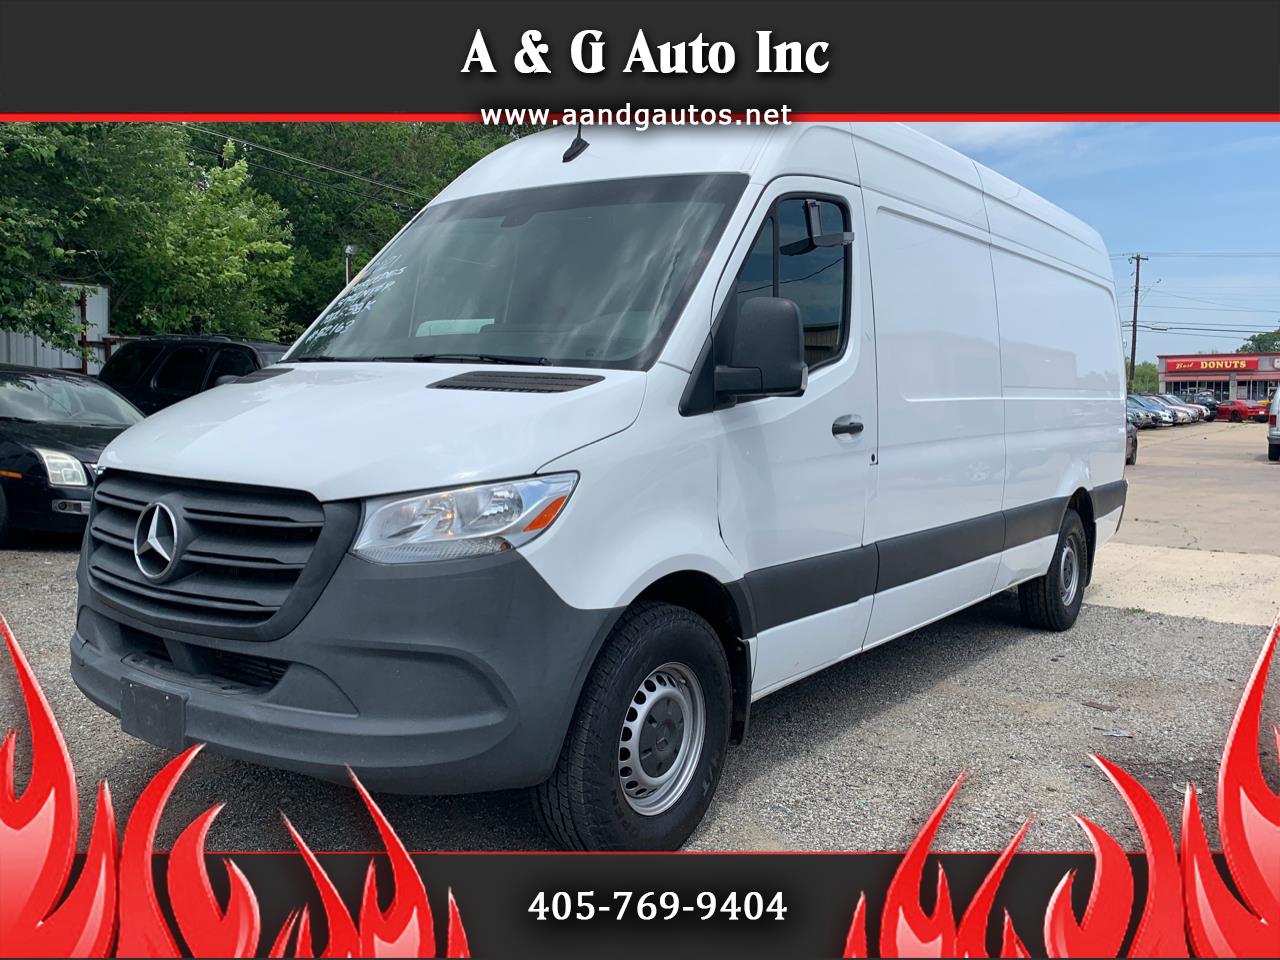 2021 Mercedes-Benz Sprinter for sale in Oklahoma City OK 73141 by A & G Auto Inc